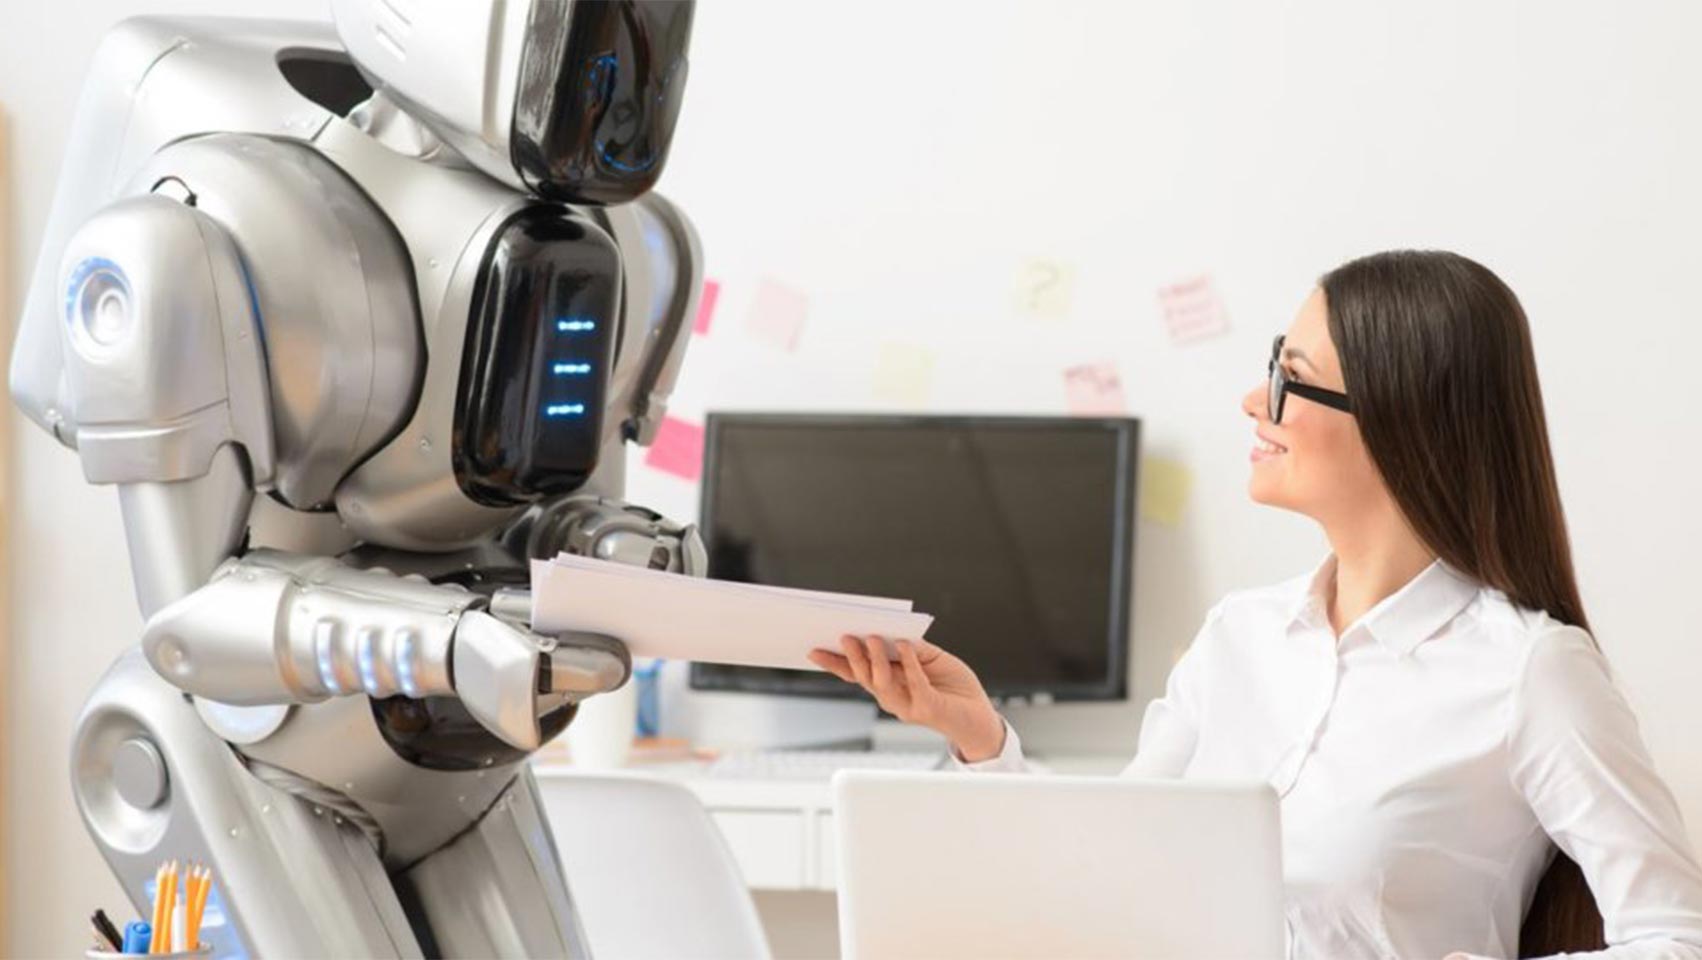 Vera, the robot that makes you pass your job interview!